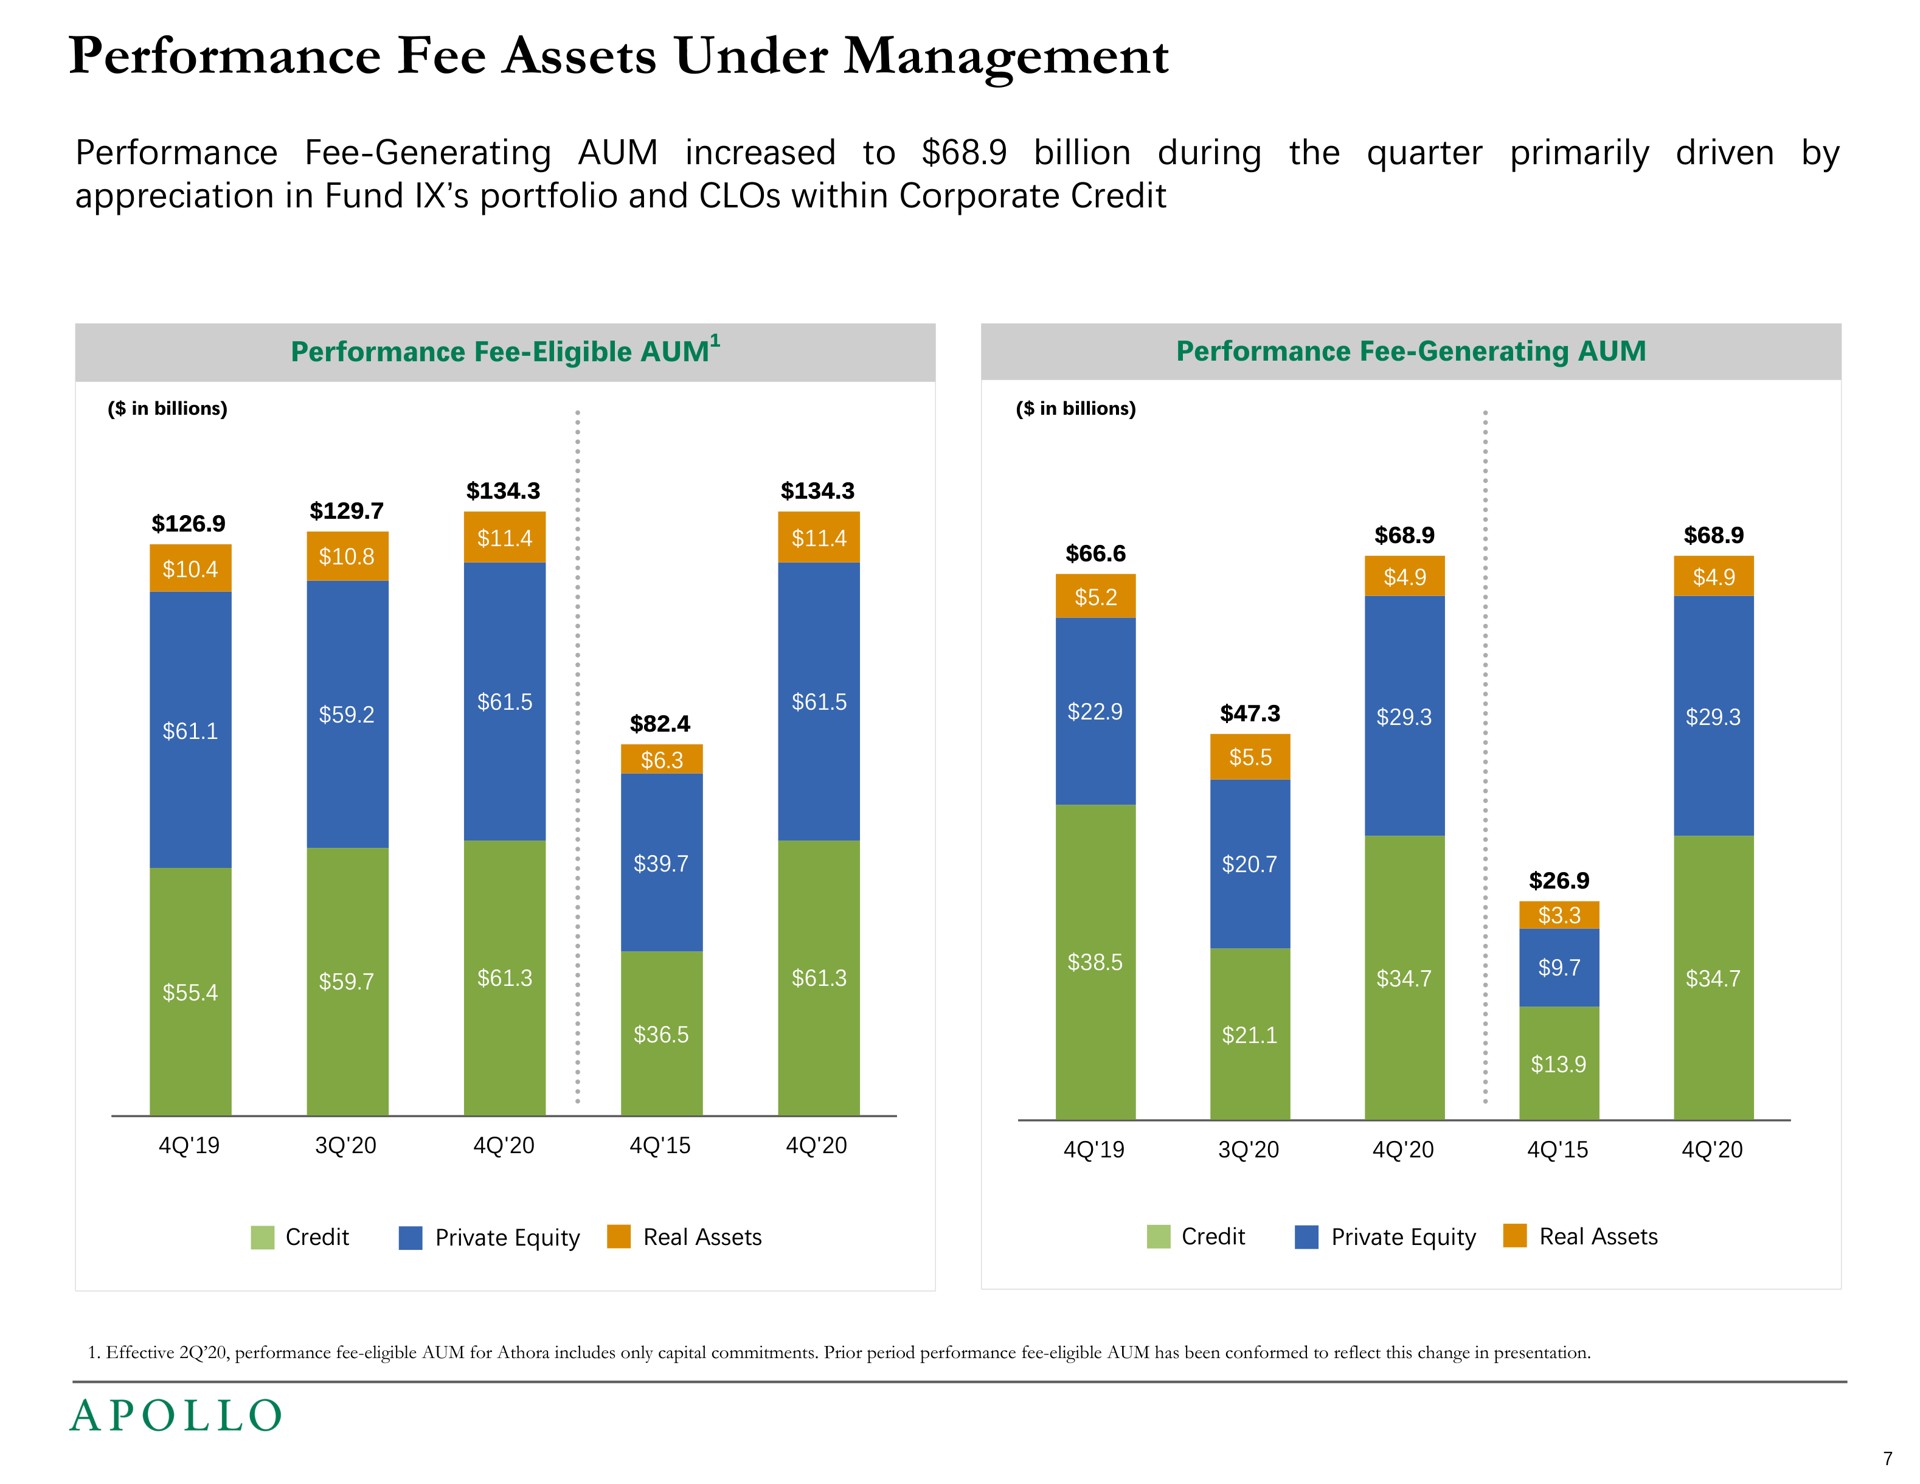 performance fee assets under management performance fee generating aum increased to billion during the quarter primarily driven by appreciation in fund portfolio and within corporate credit | Apollo Global Management